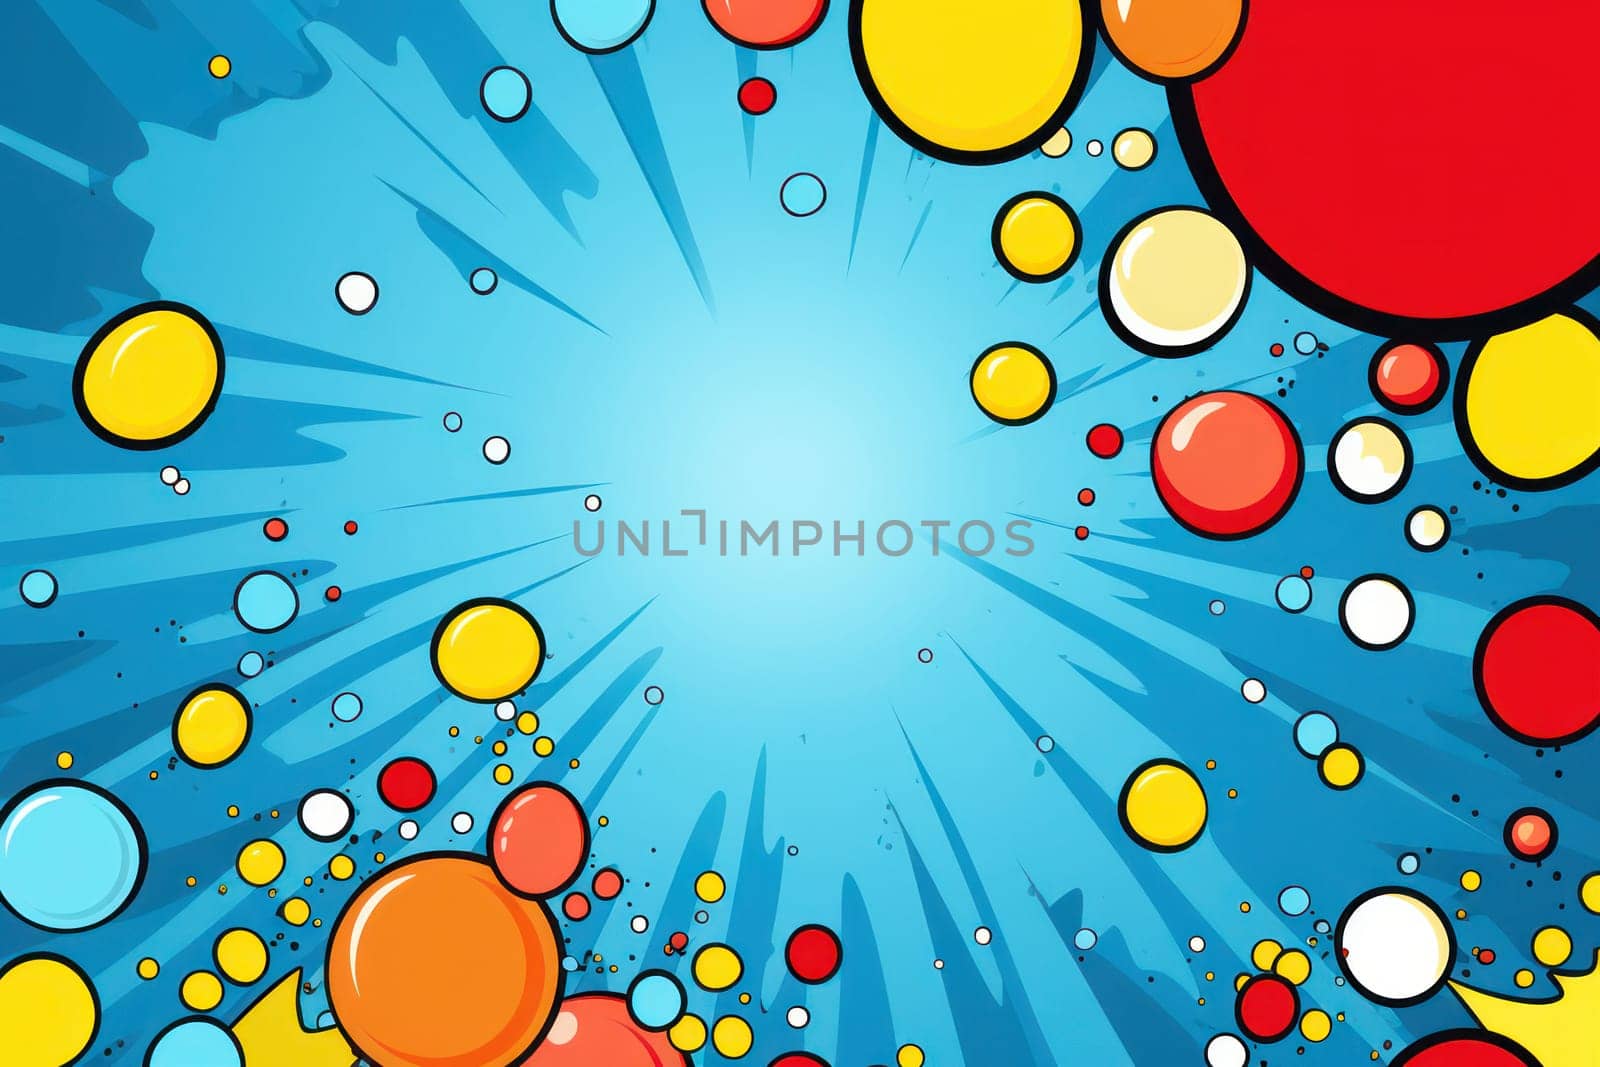 Pop Explosion: Retro Cartoon Graphic Design with Abstract Burst of Colorful, Bright Halftone Comic Bubble on Vintage Blue Background by Vichizh